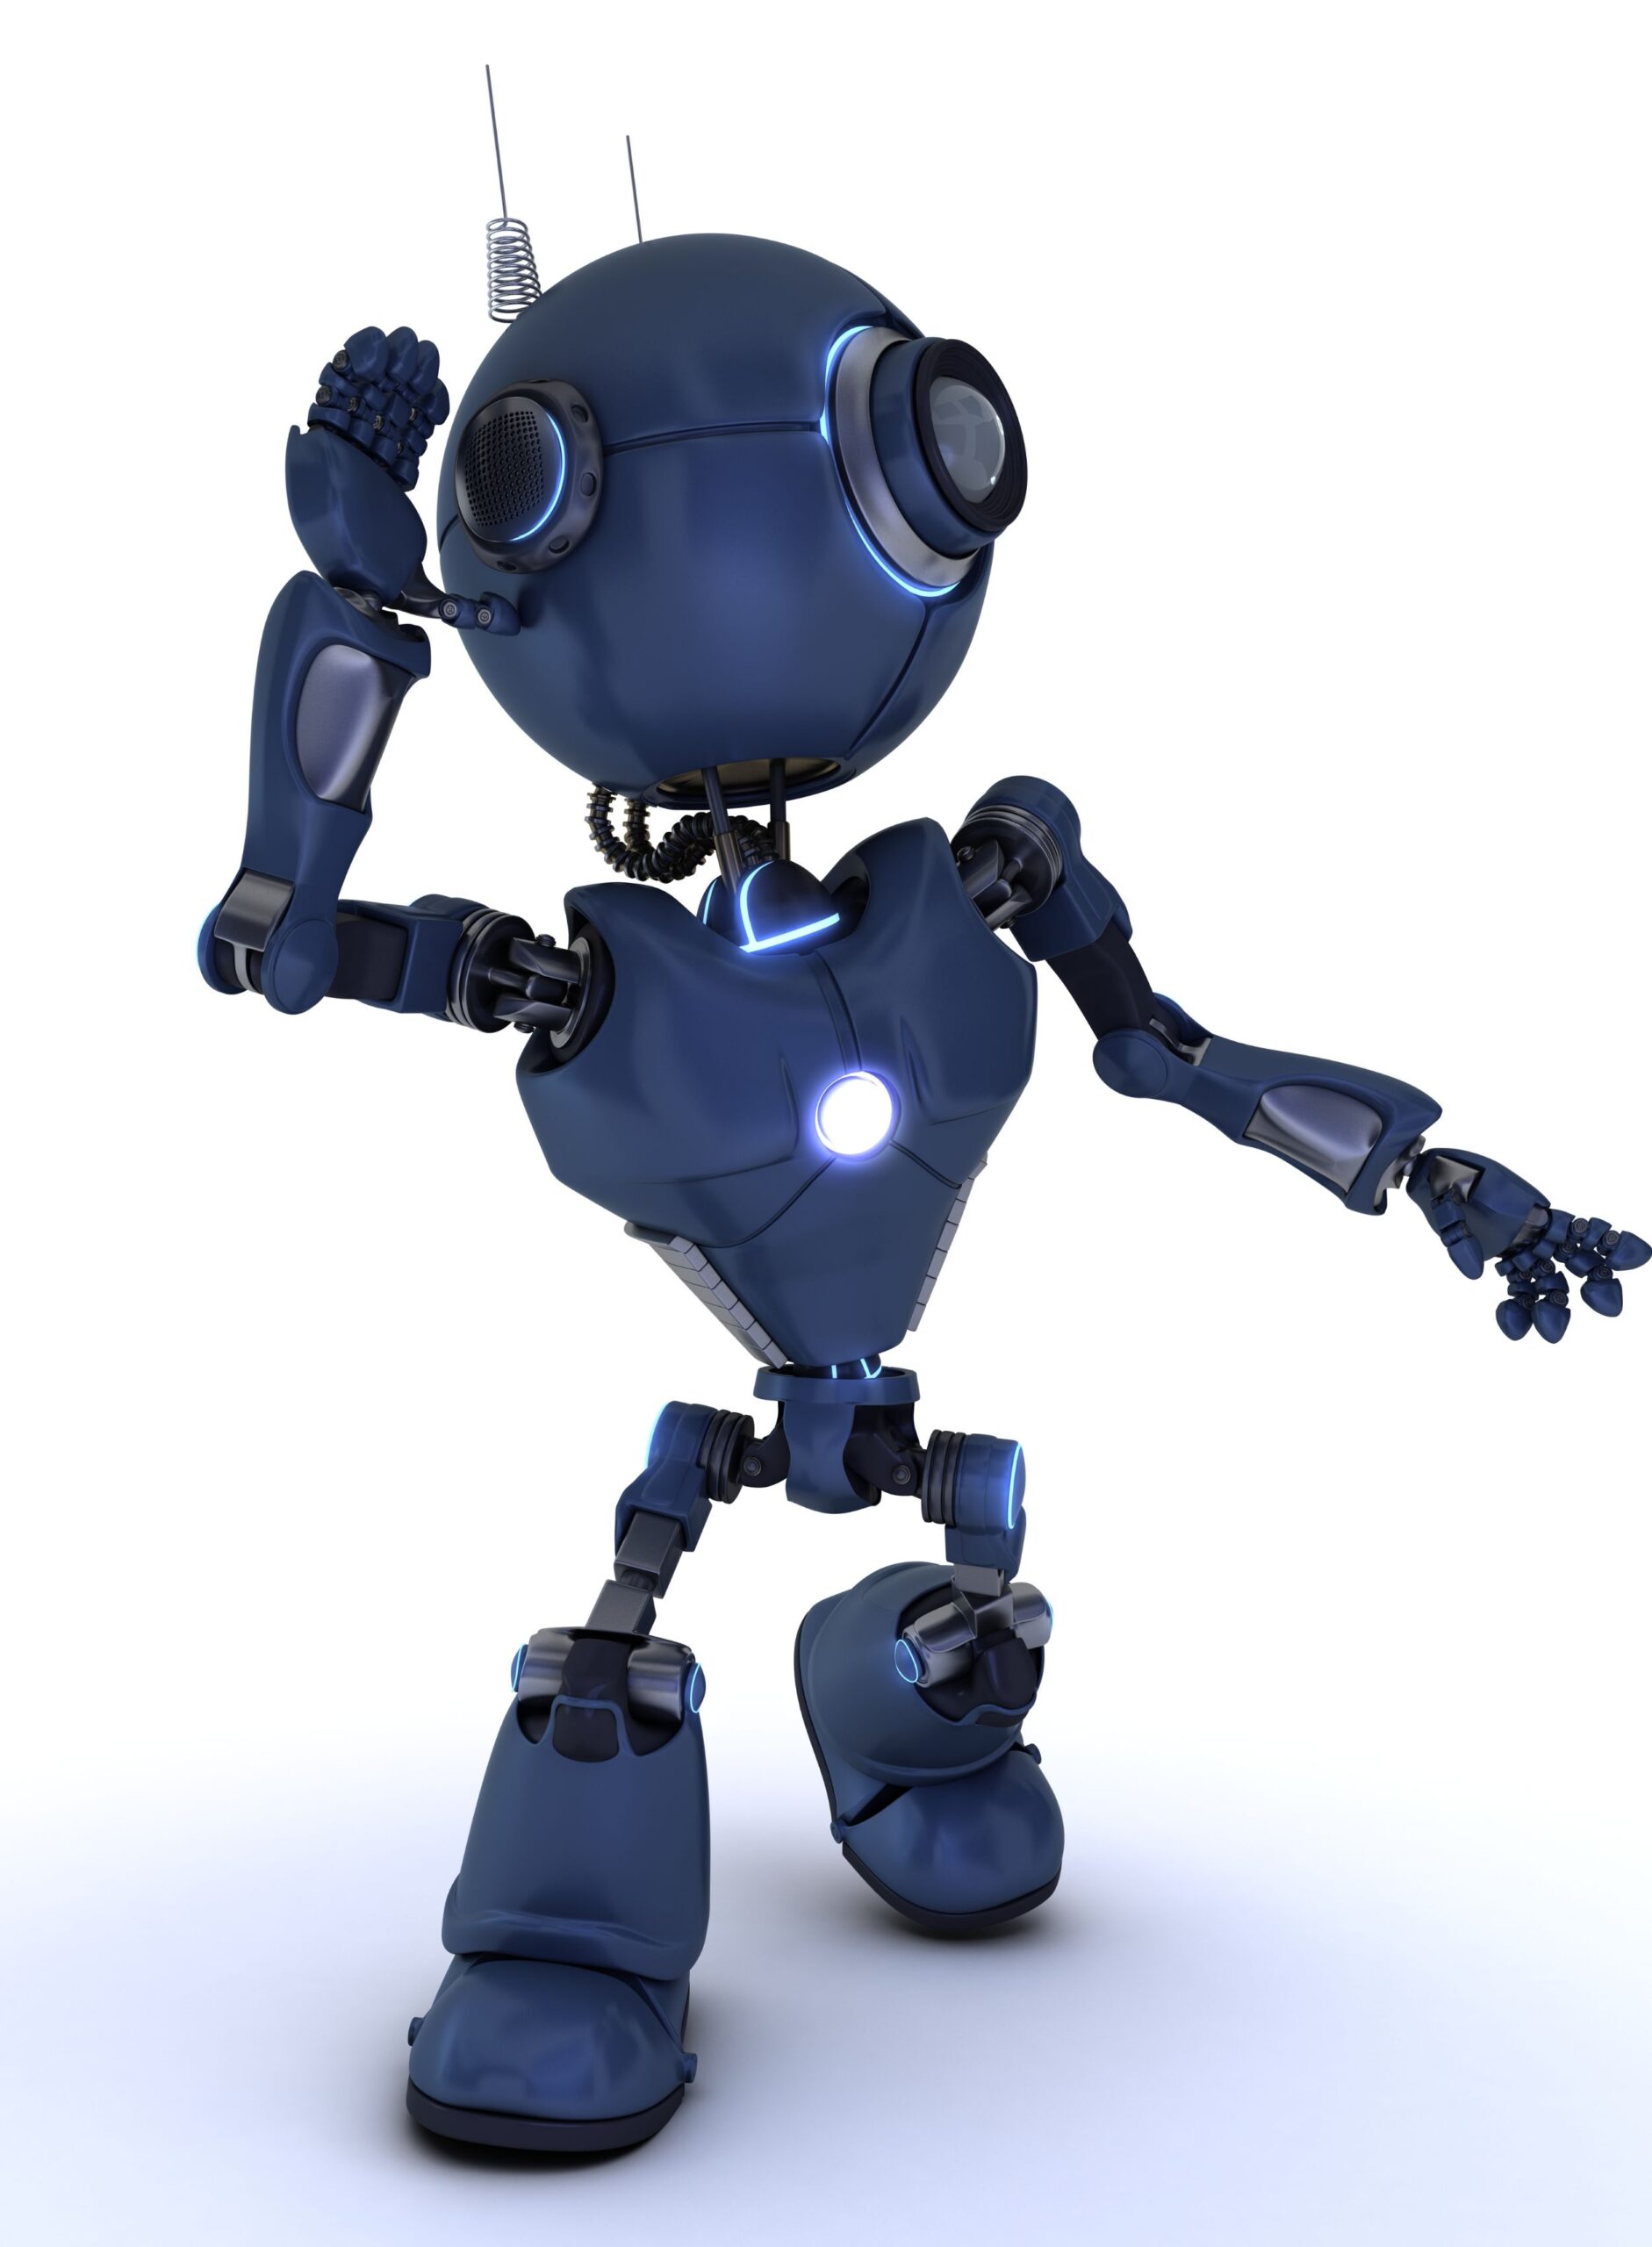 A futuristic robot representing the cutting-edge technology in AI-enhanced call answering.